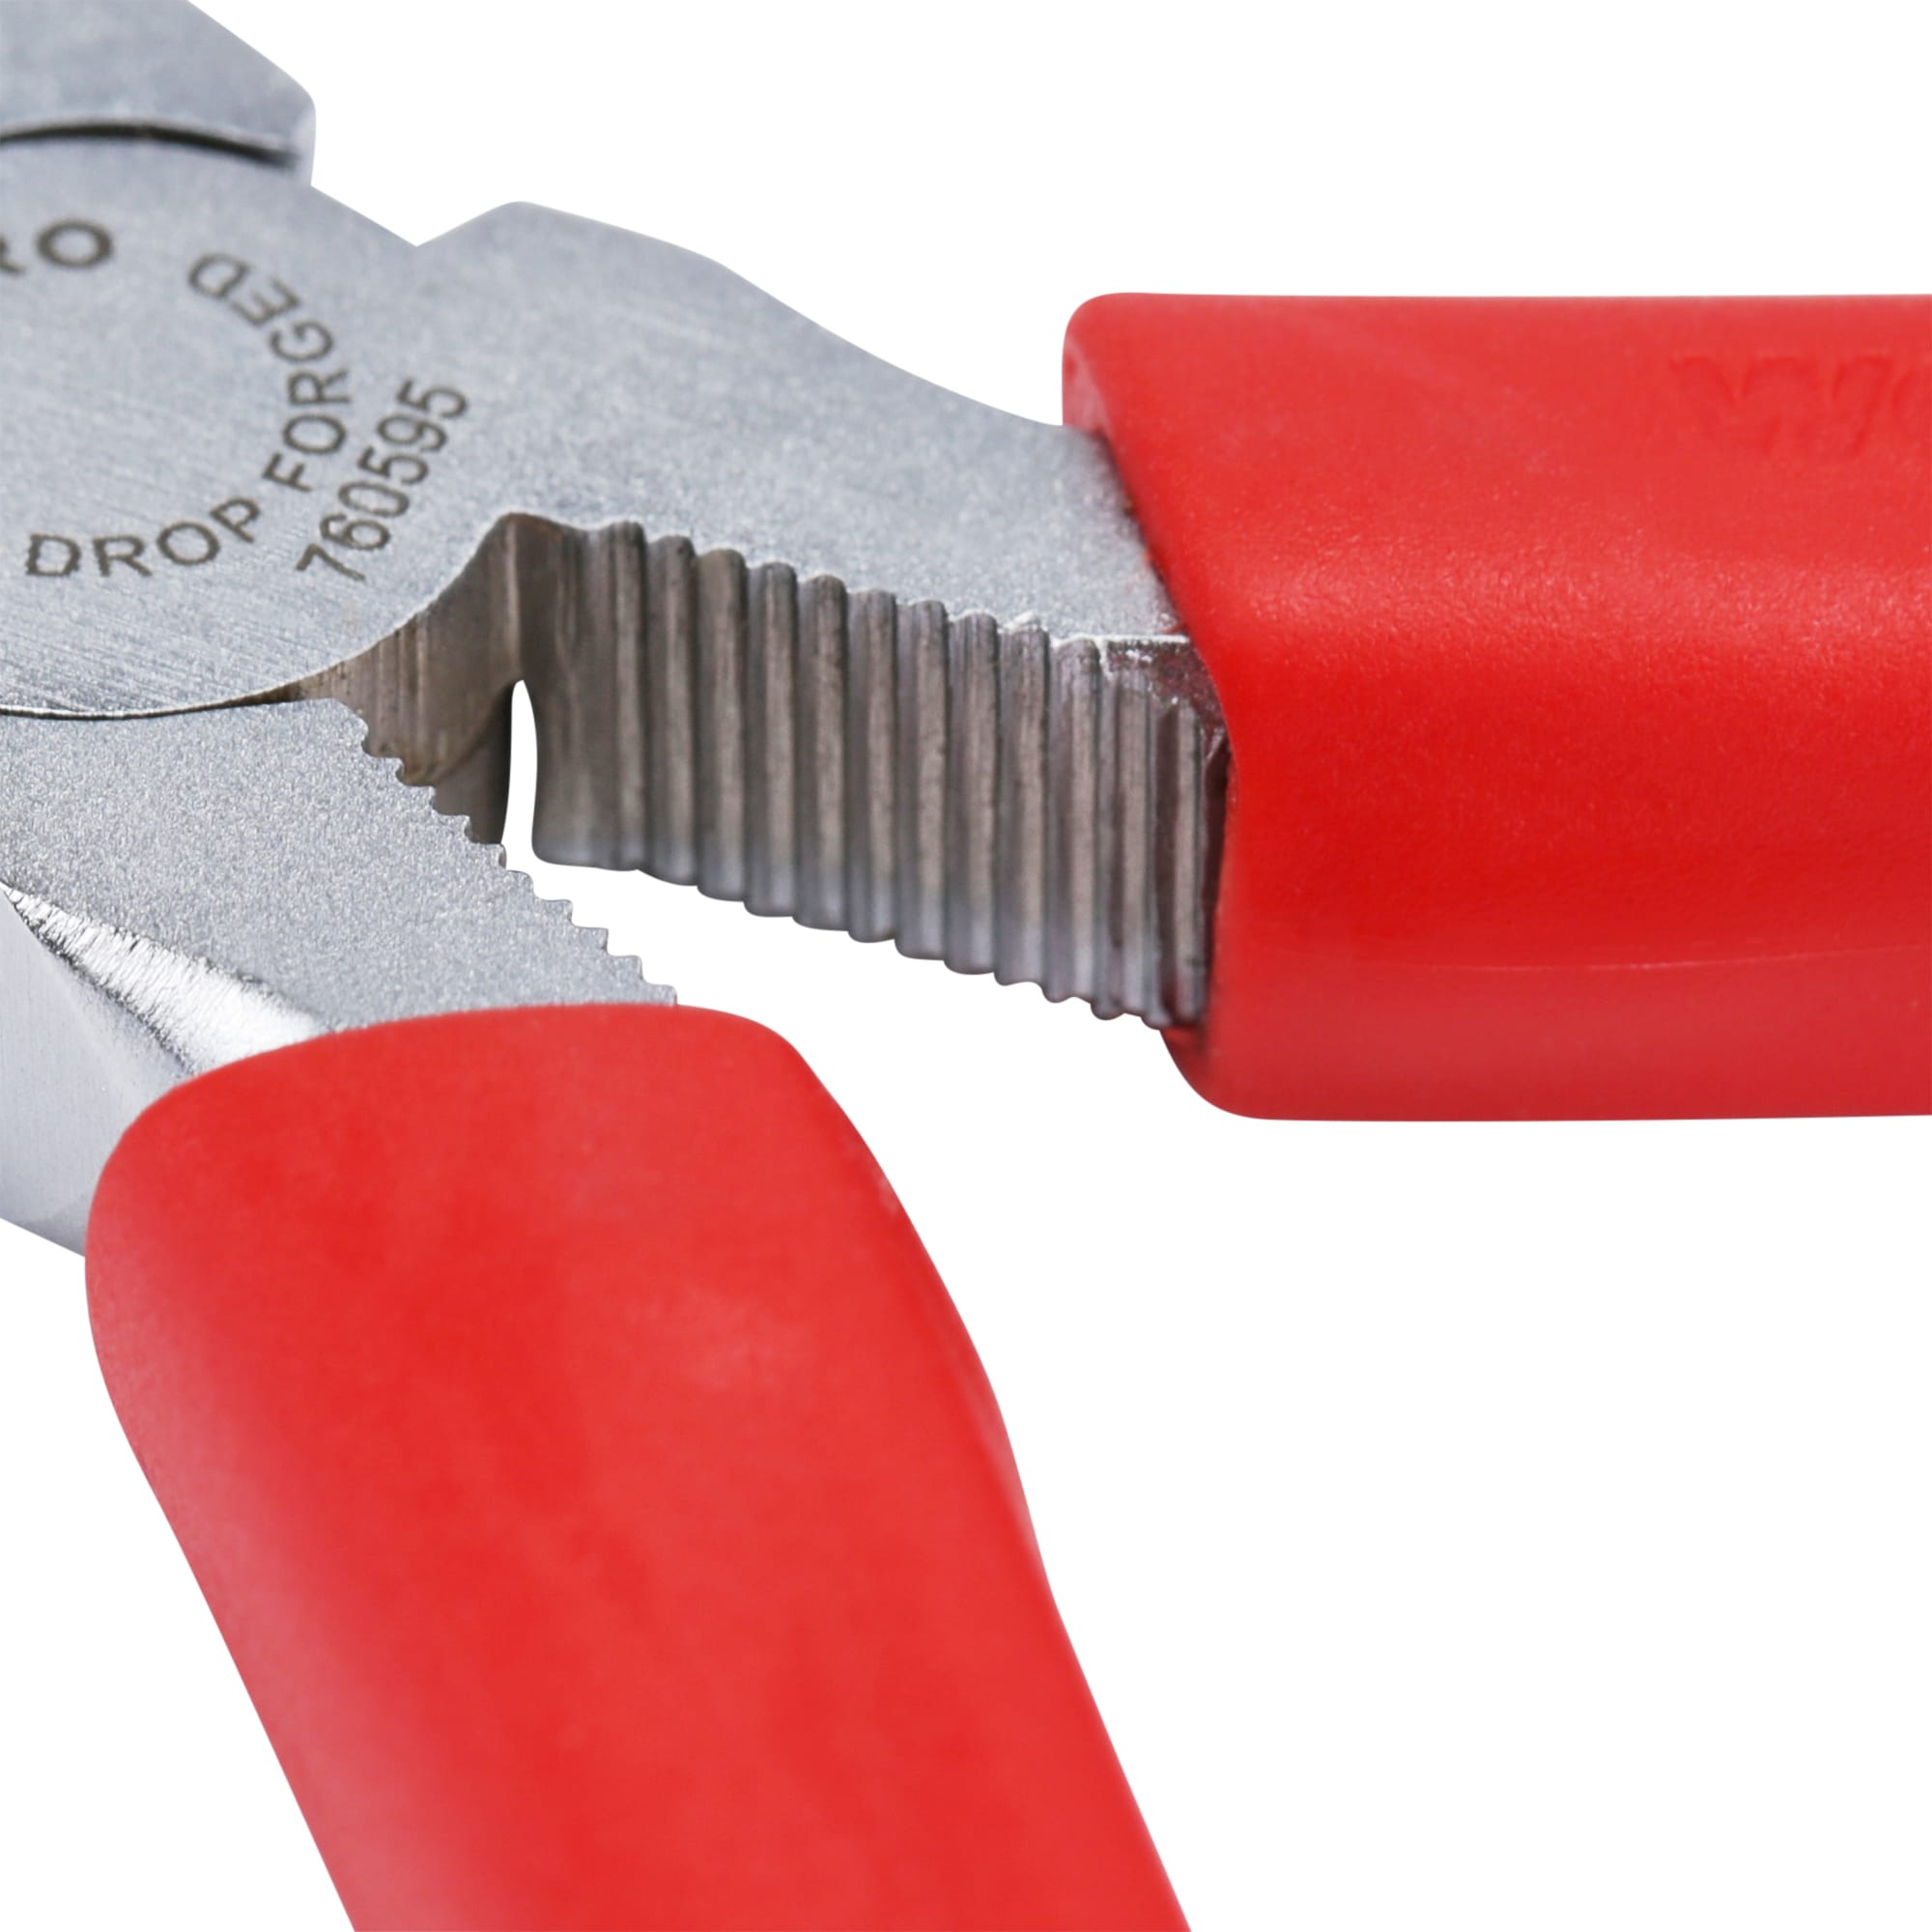 KNIPEX Red Needle Nose Pliers 6.4-in - Precision Pliers for Assembly Work,  Bending, and Adjusting in the Pliers department at